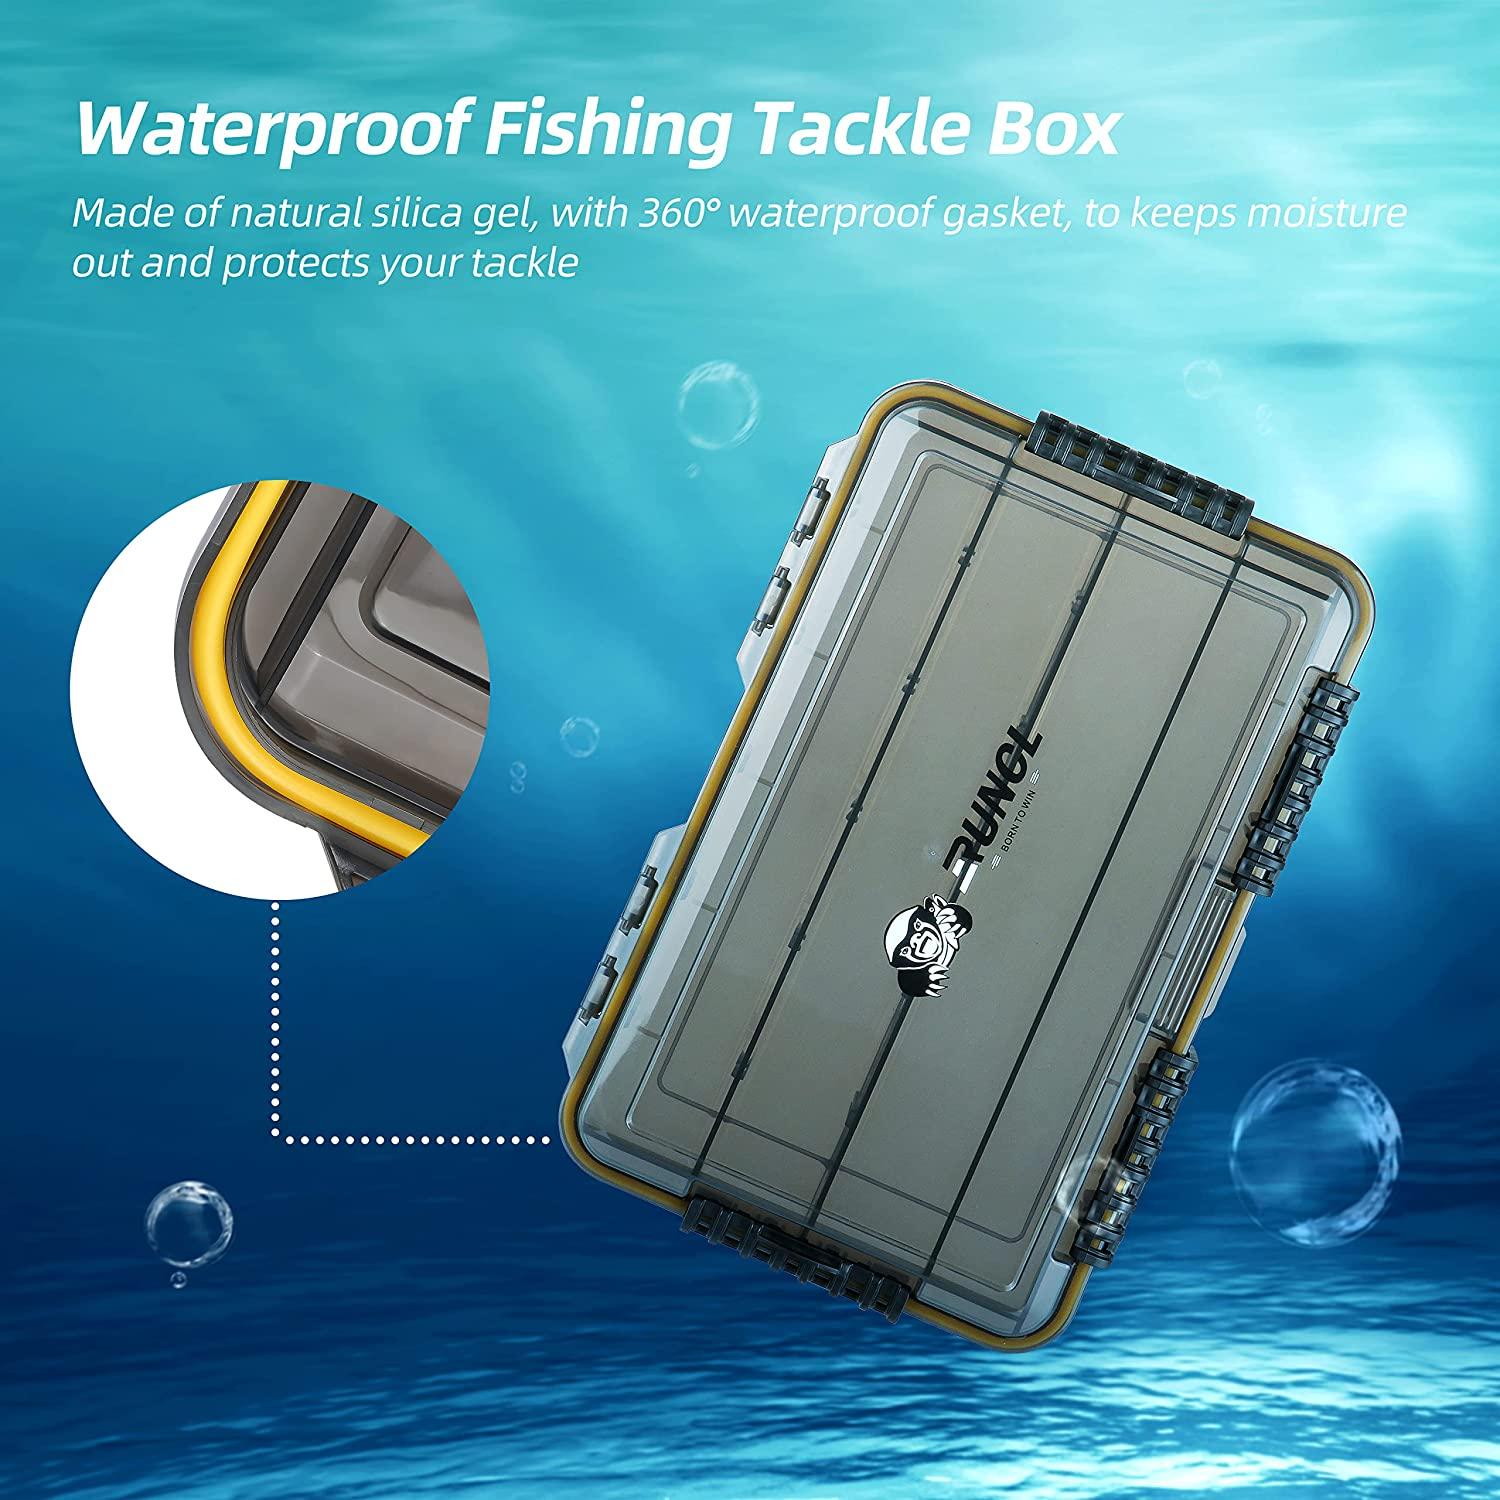  RUNCL Small Fishing Tackle Box, 3500 3600 Size Double Buckle  Open Tackle Trays, Plastic Storage Parts Box with Removable Dividers for  Saltwater, Freshwater, Fly Fishing, 1/2/4 Pack : Sports & Outdoors